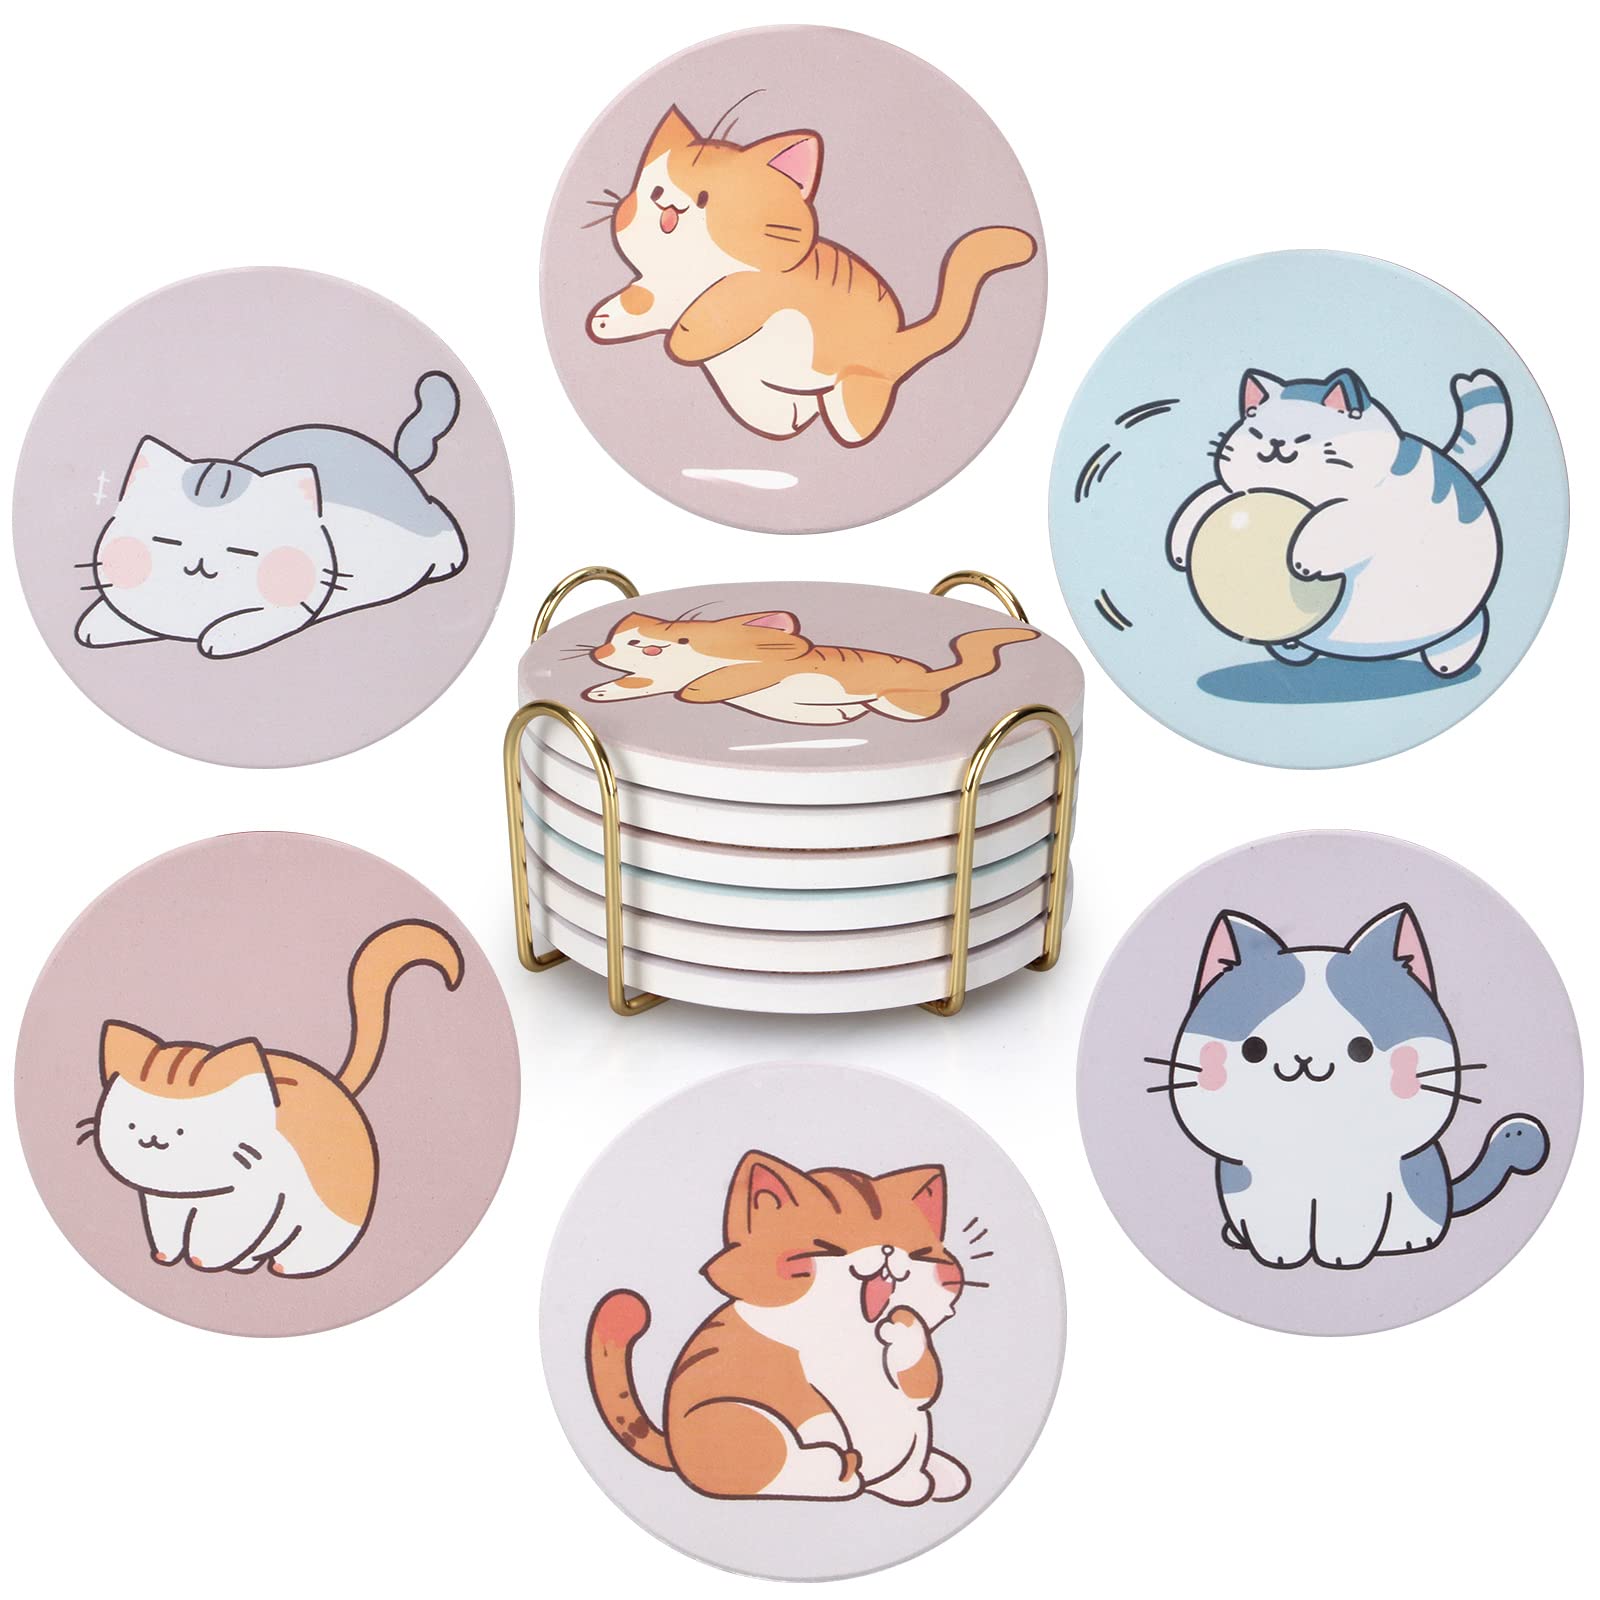 6 Pcs Cute Coasters Funny Cat Coasters with Holder Absorbent Ceramic Coasters for Table Drink Coaster Gift Round Multicolor Beverage Beer Coasters Best Fun Bar Coasters